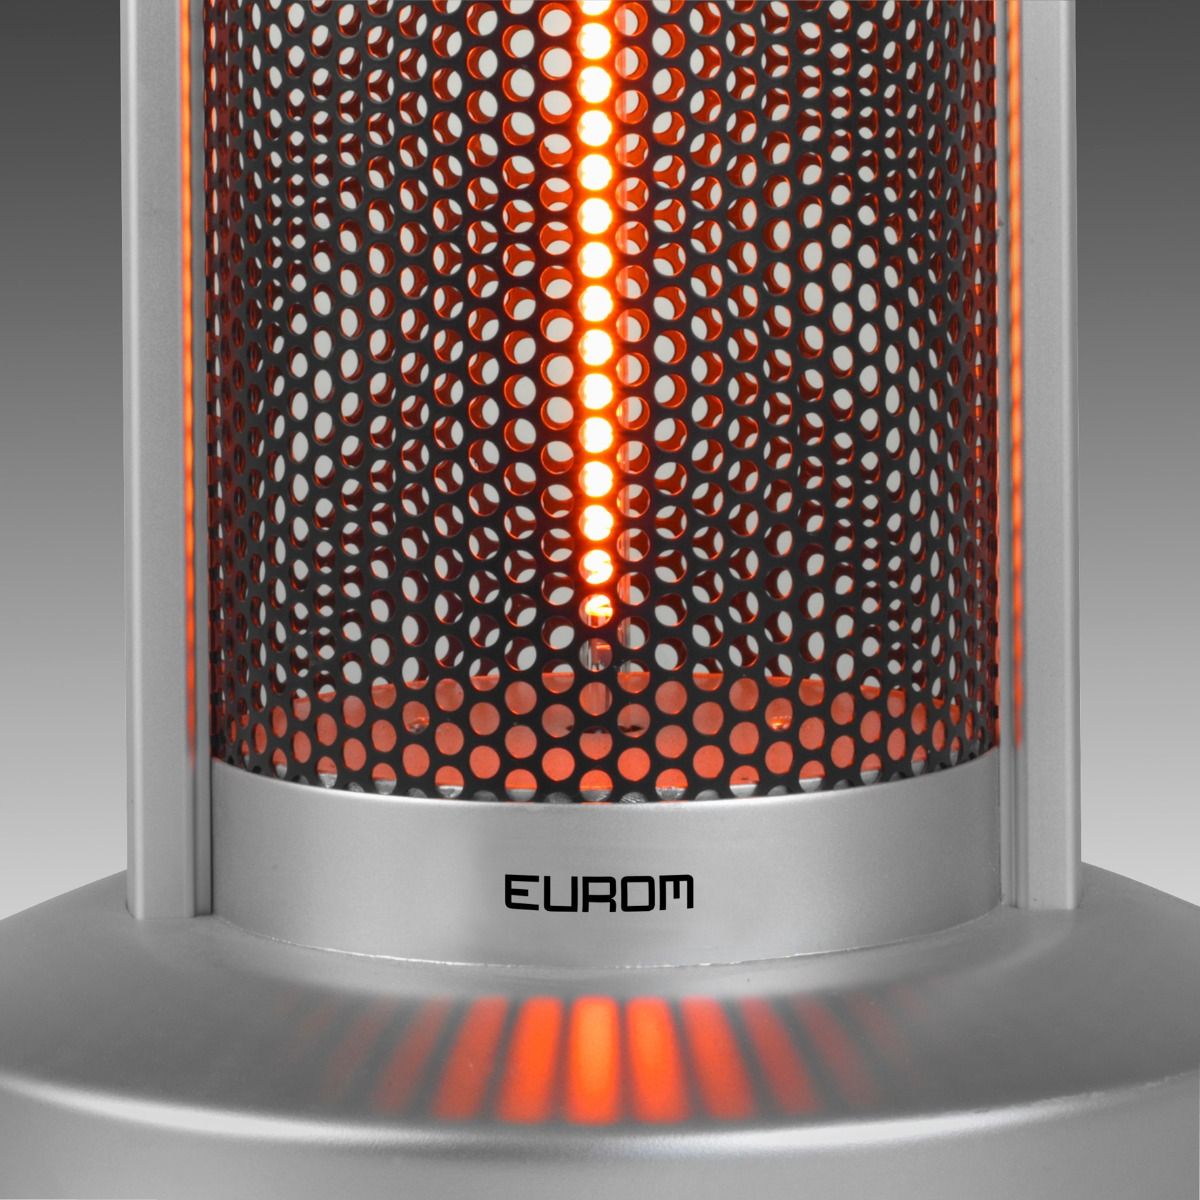 Eurom Under table heater (carbon)